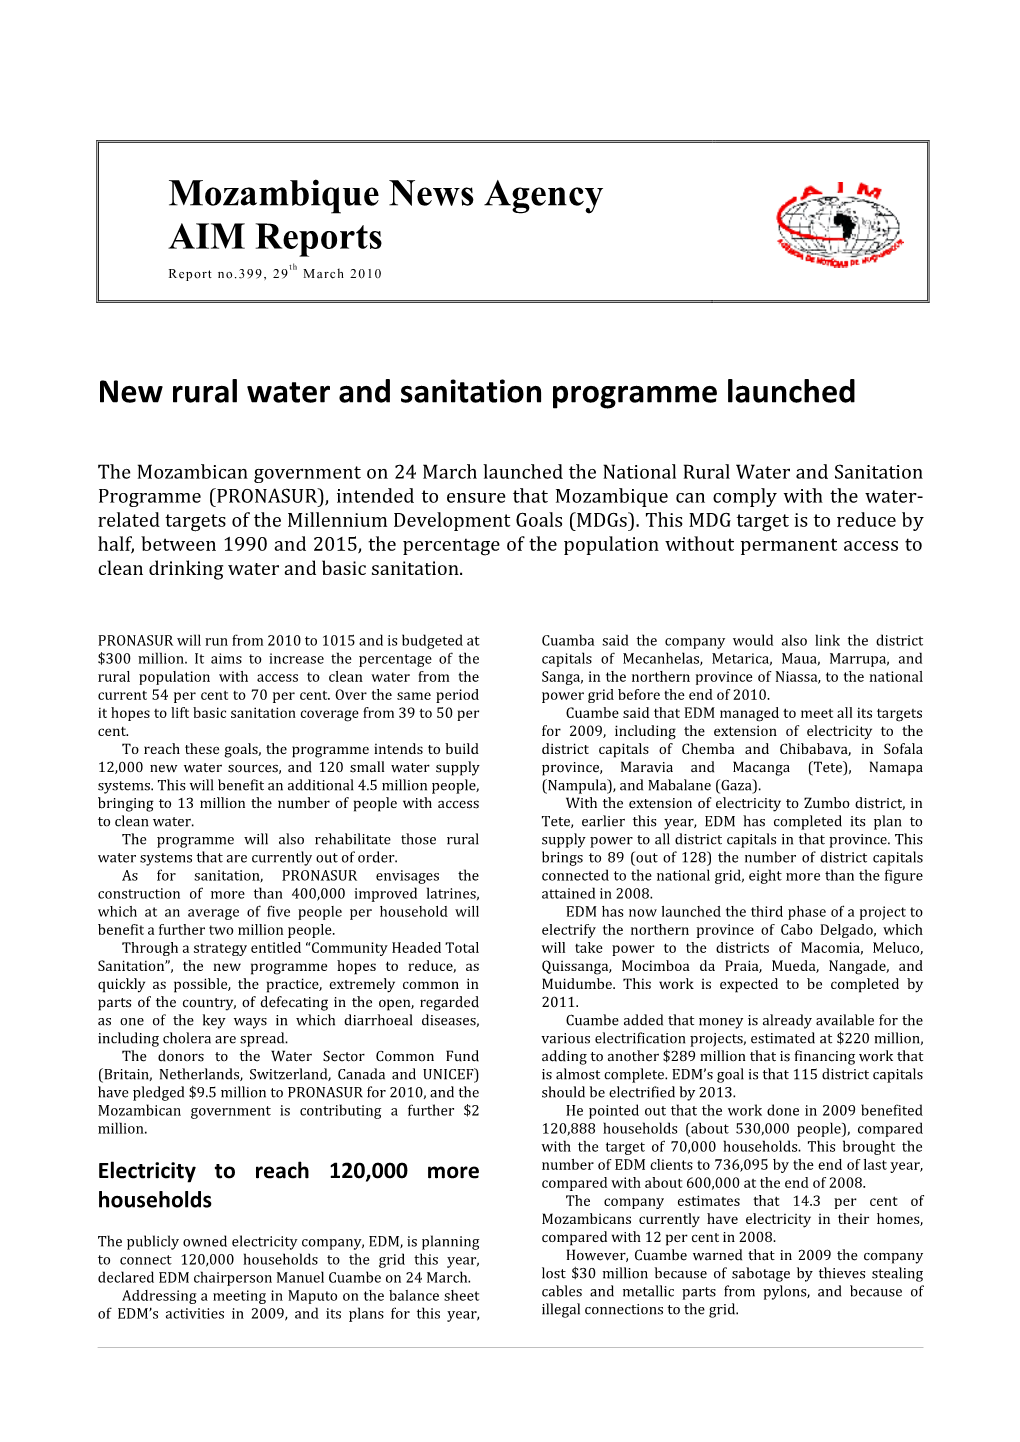 Mozambique News Agency AIM Reports Th Report No.399, 29 March 2010